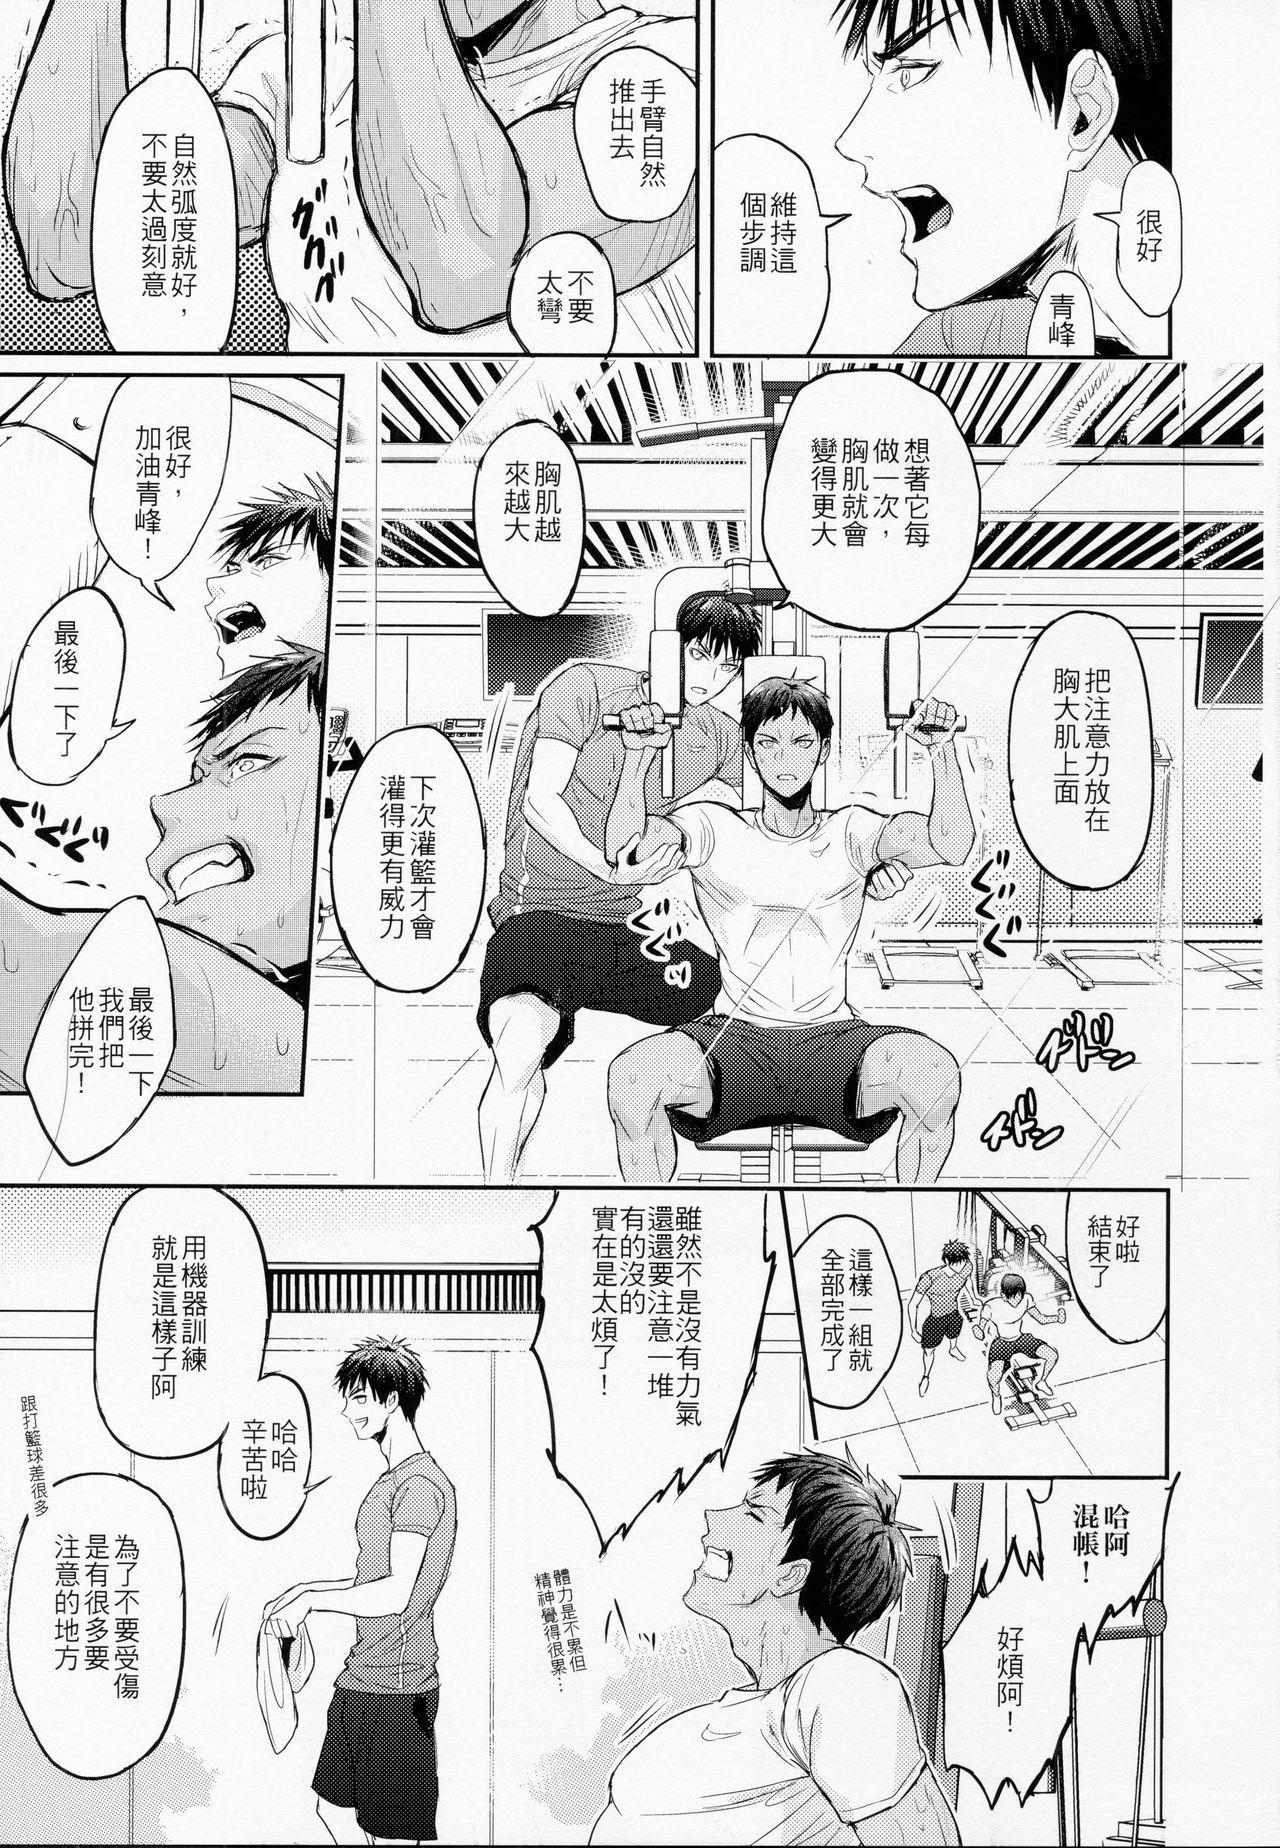 Soloboy This is how we WORK IT OUT - Kuroko no basuke Mamando - Page 4